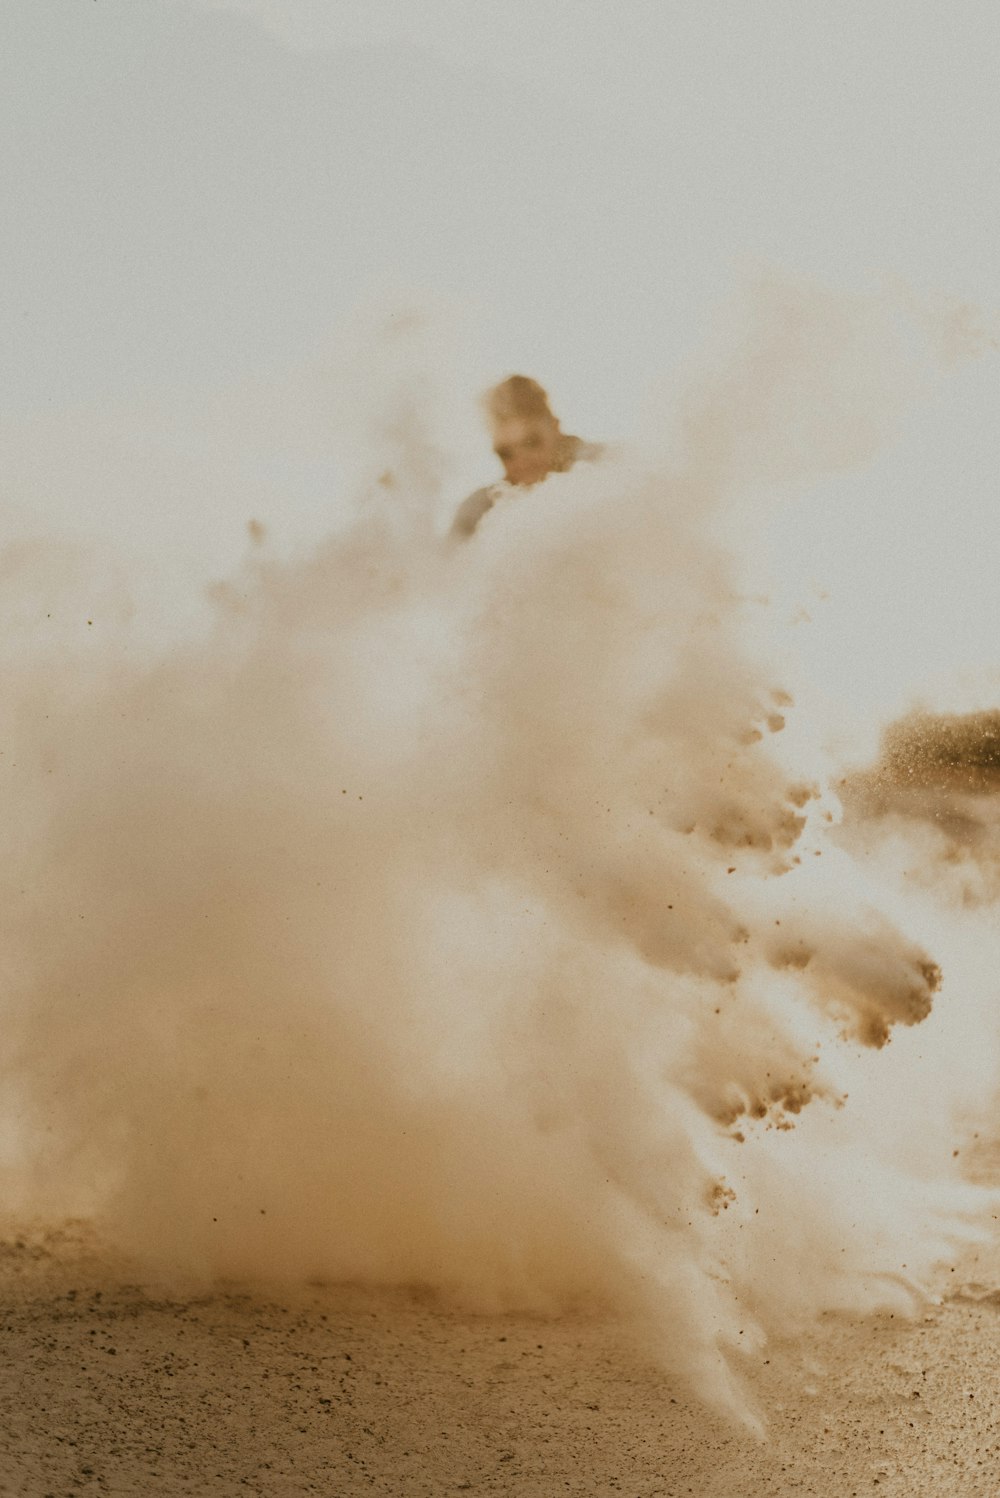 Best 500+ Dust Pictures | Download Free Images & Stock Photos On Unsplash